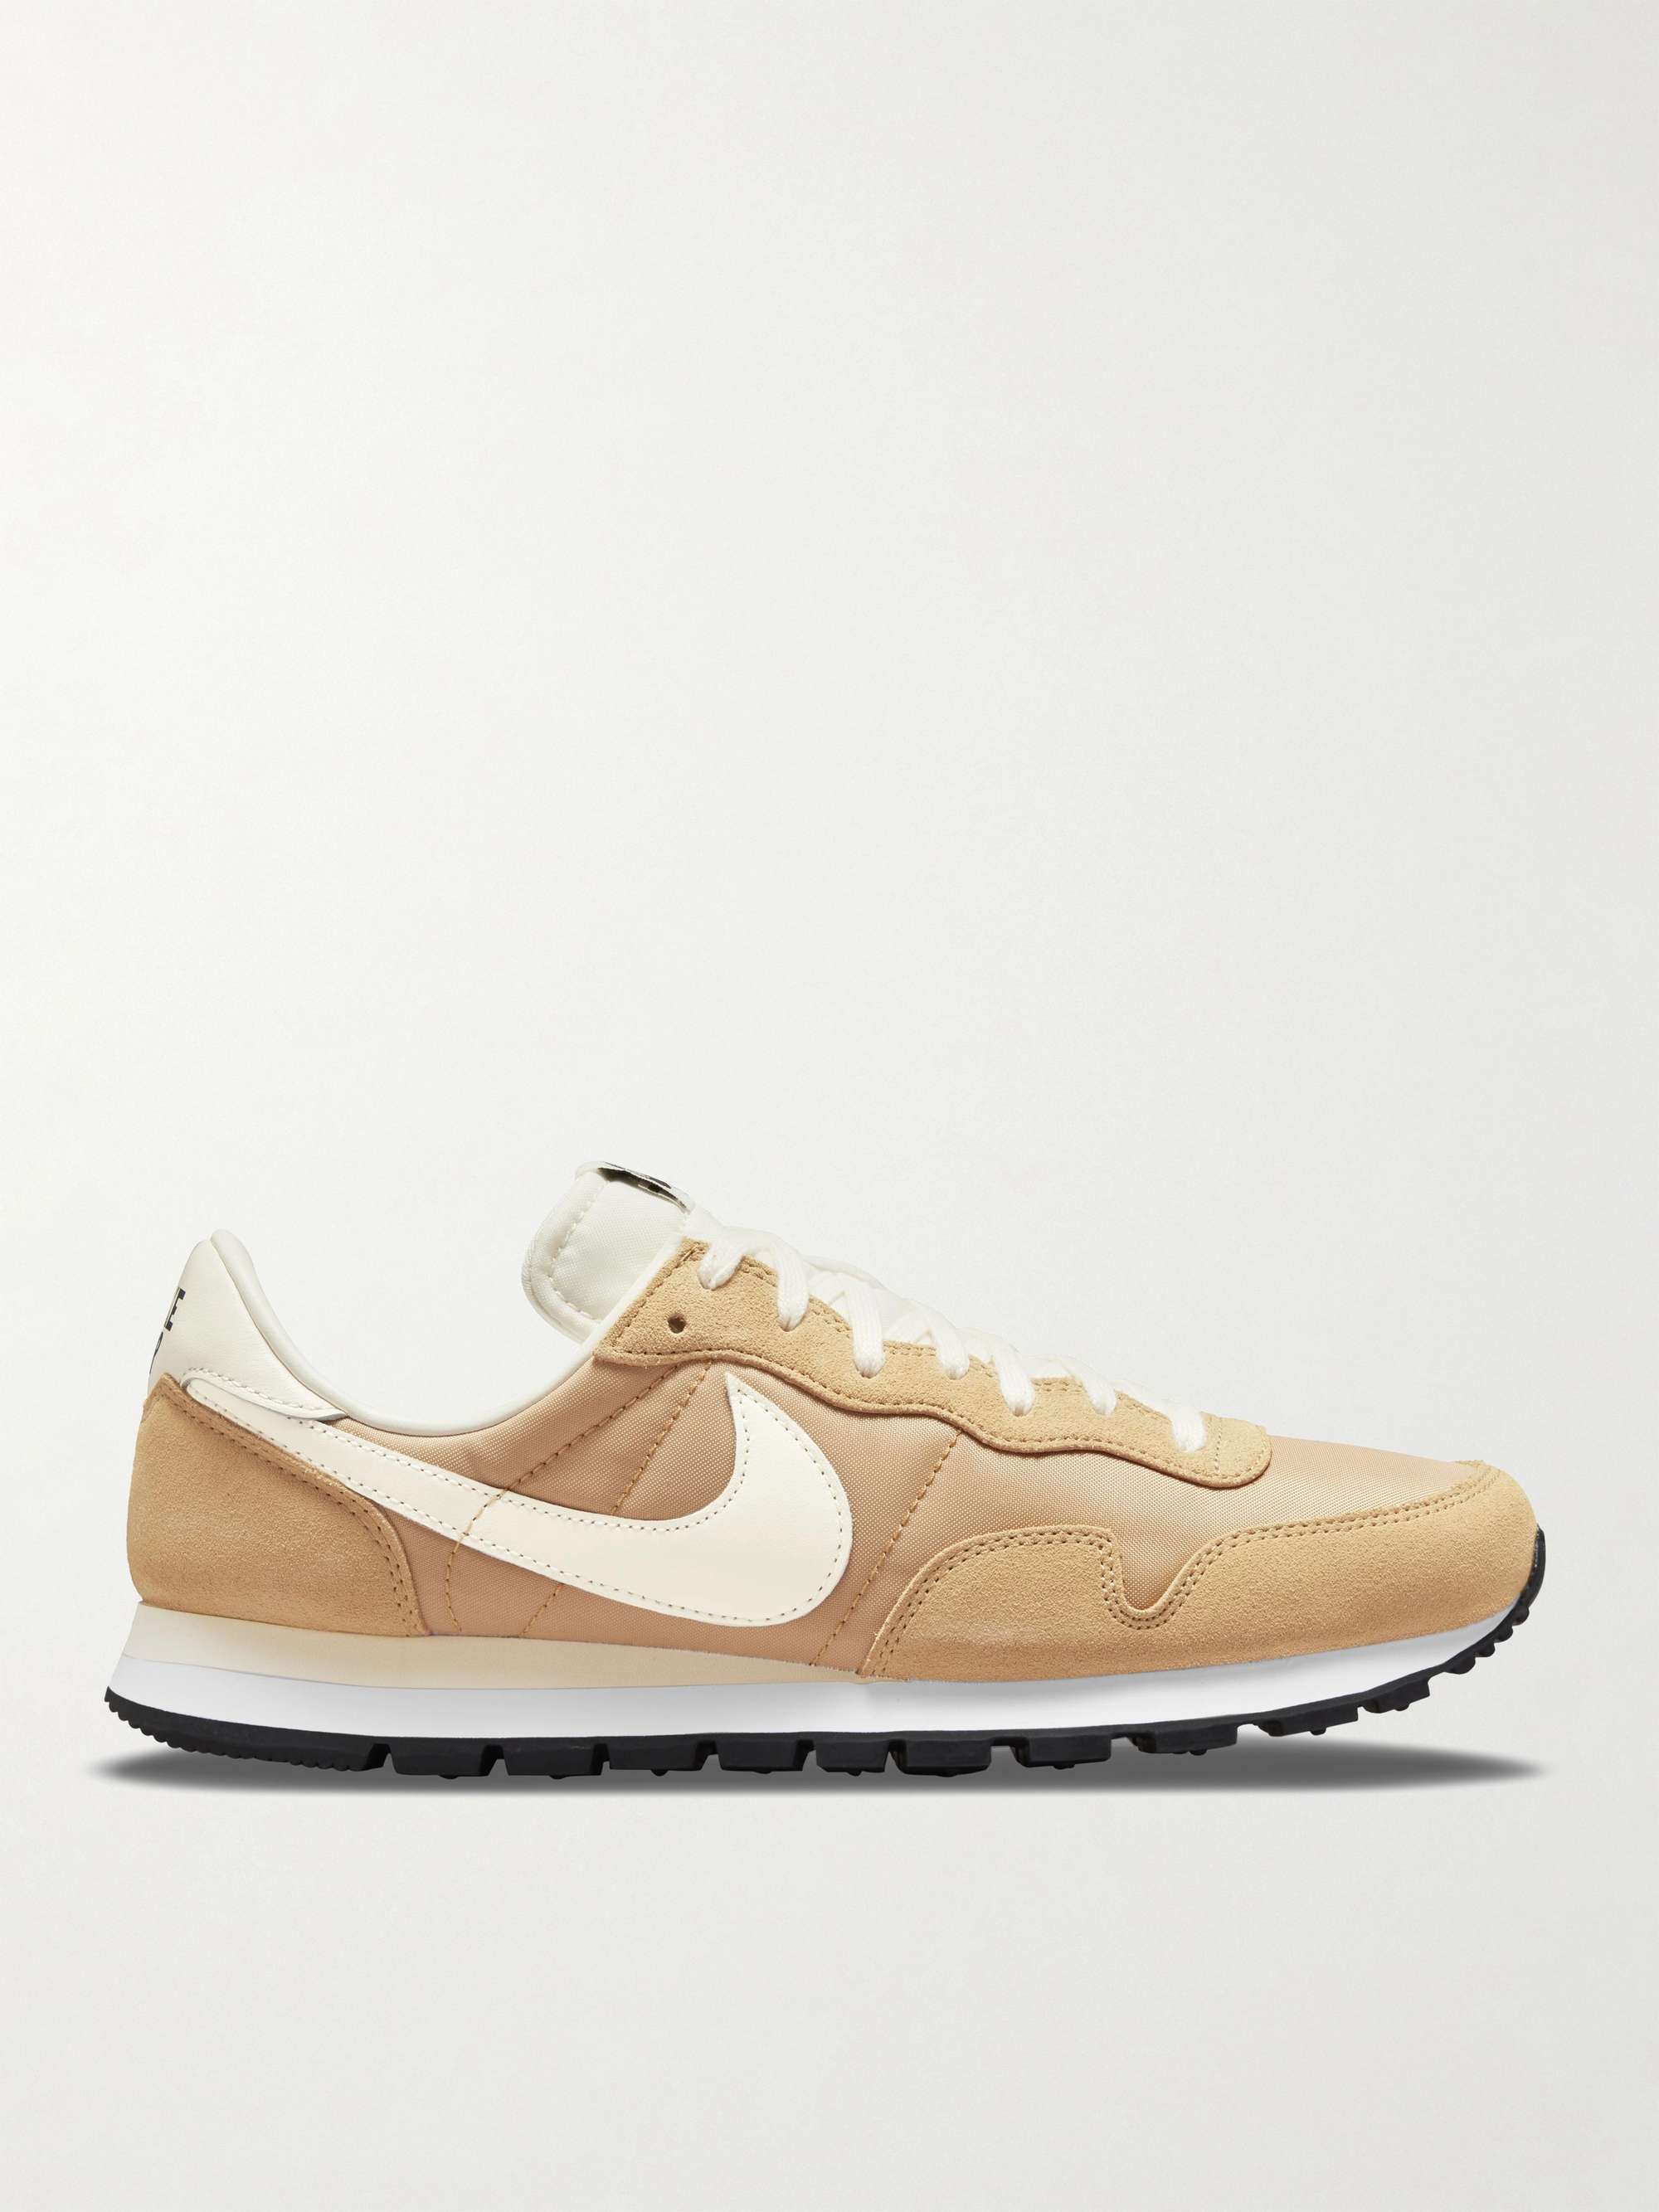 NIKE Air Pegasus 83 Leather-Trimmed Suede and Shell Sneakers | MR PORTER